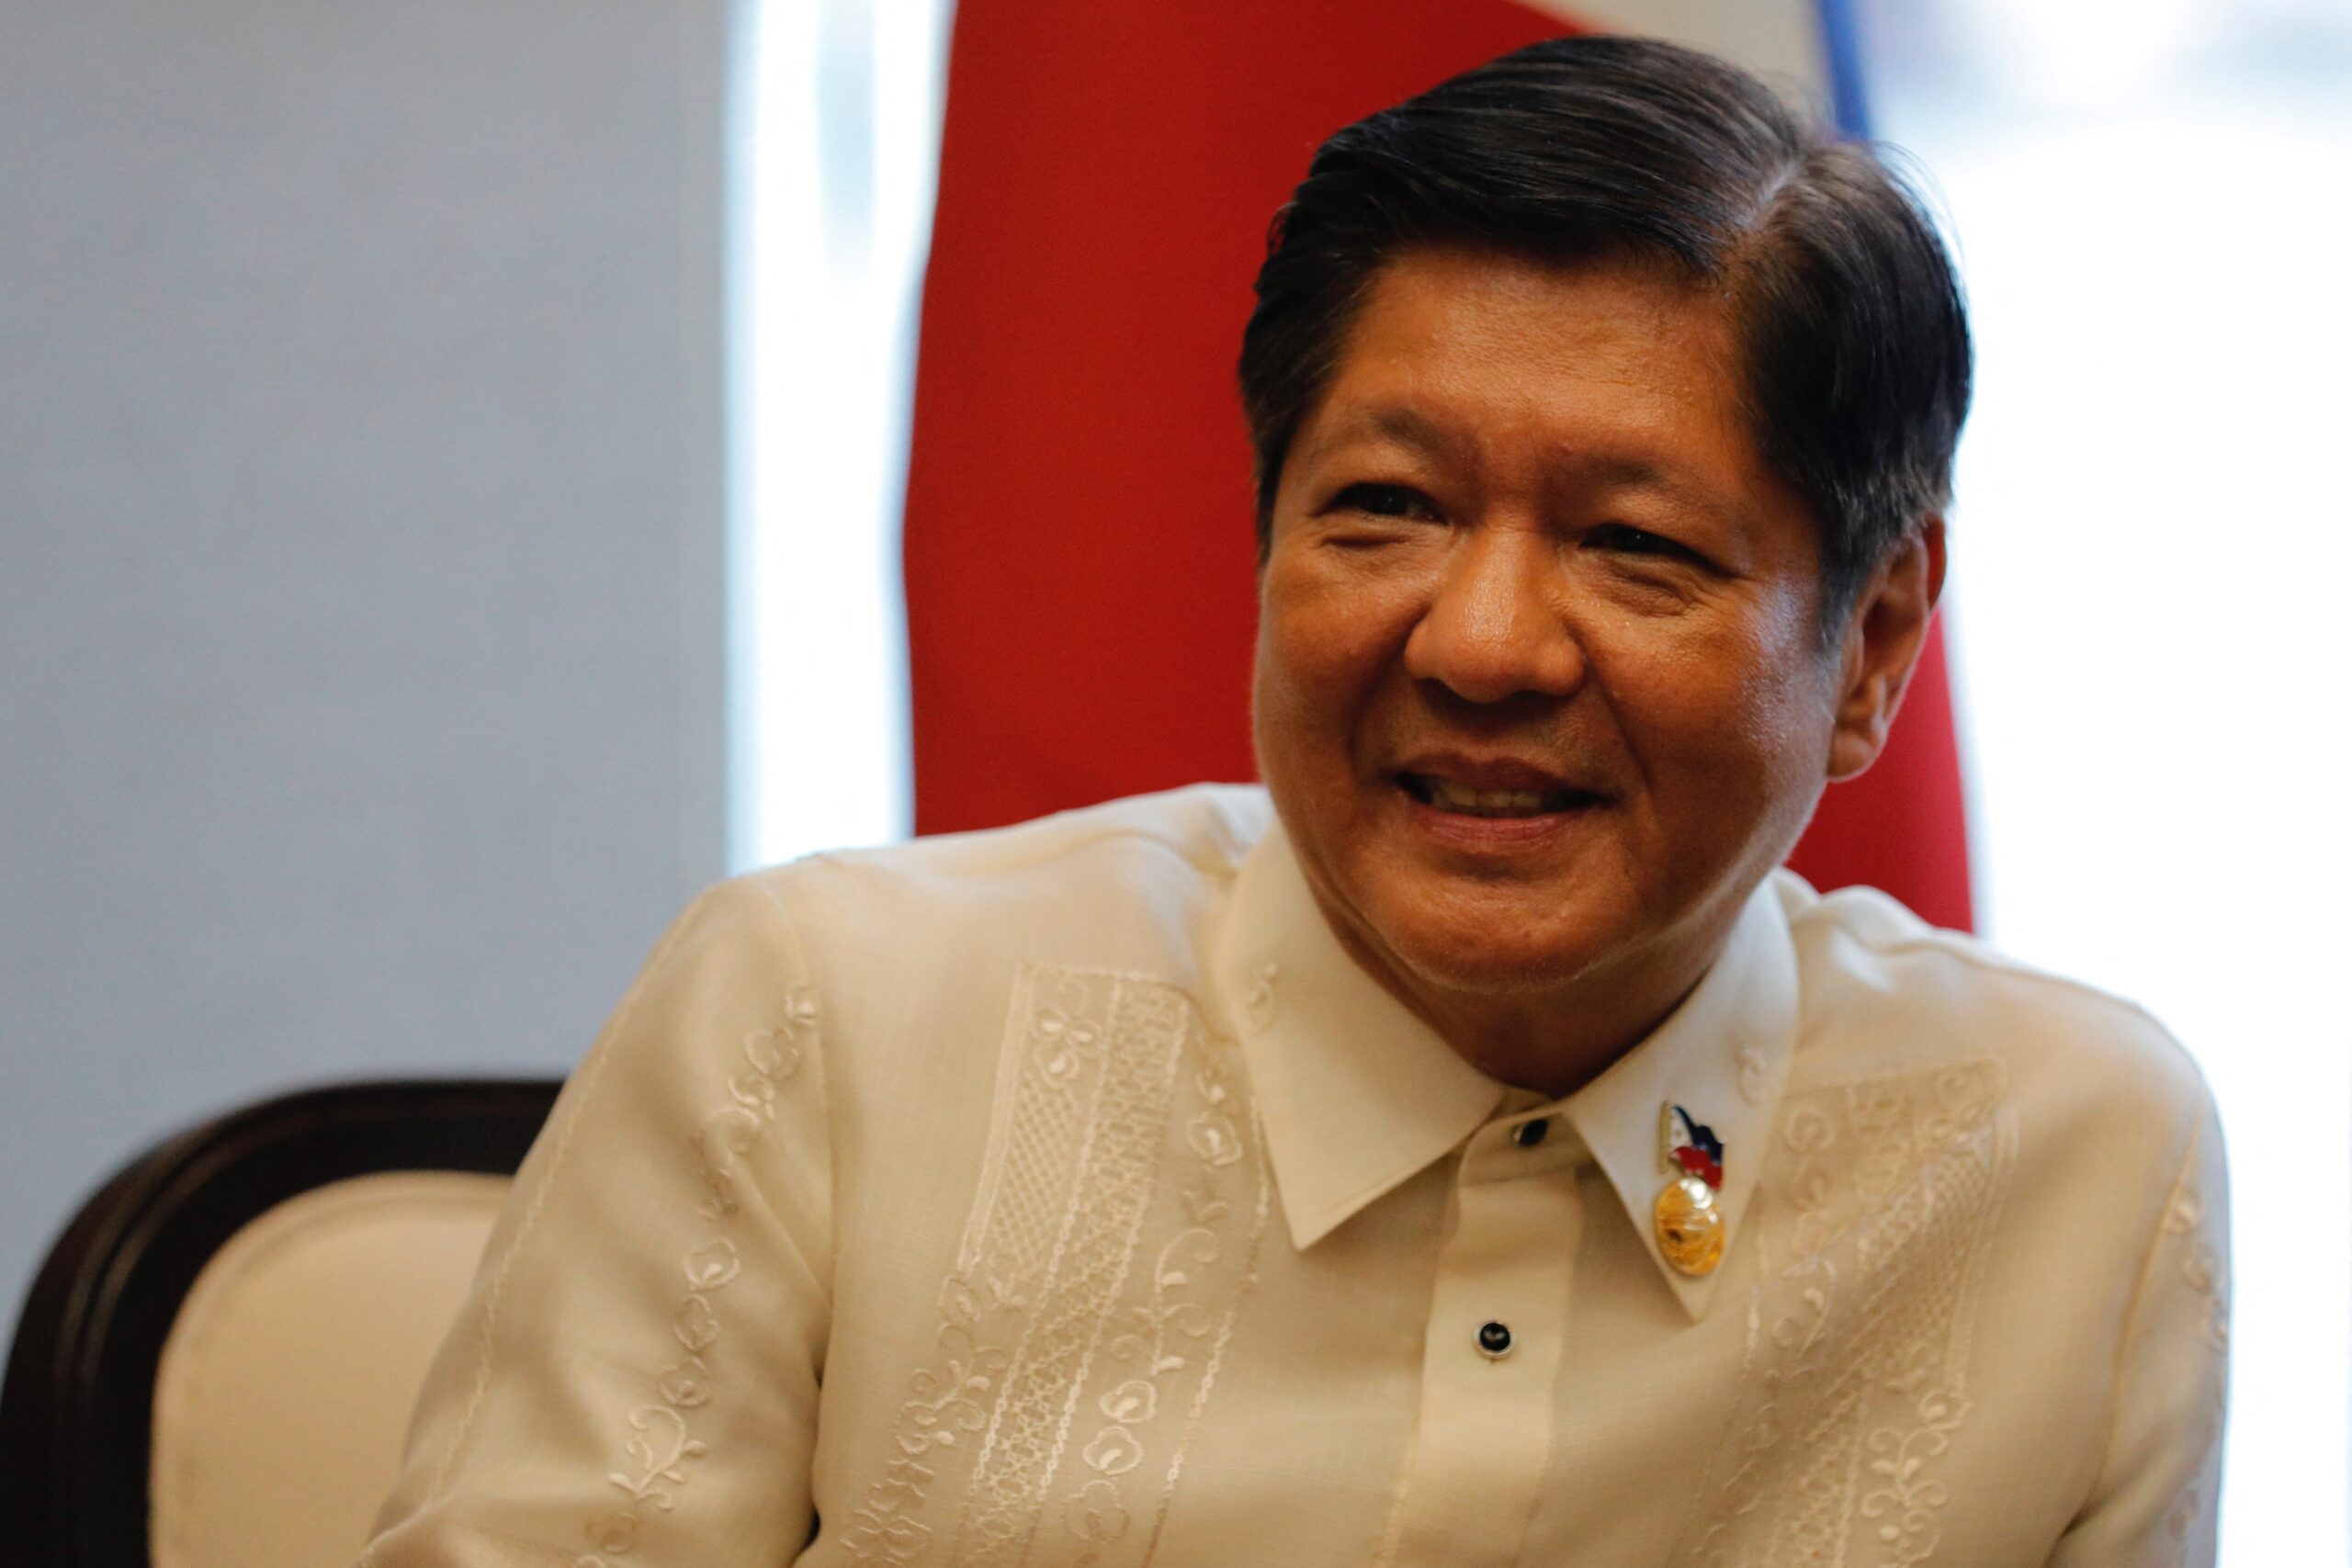 The government of Switzerland pledged its support for peacekeeping efforts in the Bangsamoro Autonomous Region in Muslim Mindanao (BARMM) after a peace treaty was enacted with the Moro Islamic Liberation Front (MILF), according to Malacañang on Wednesday.